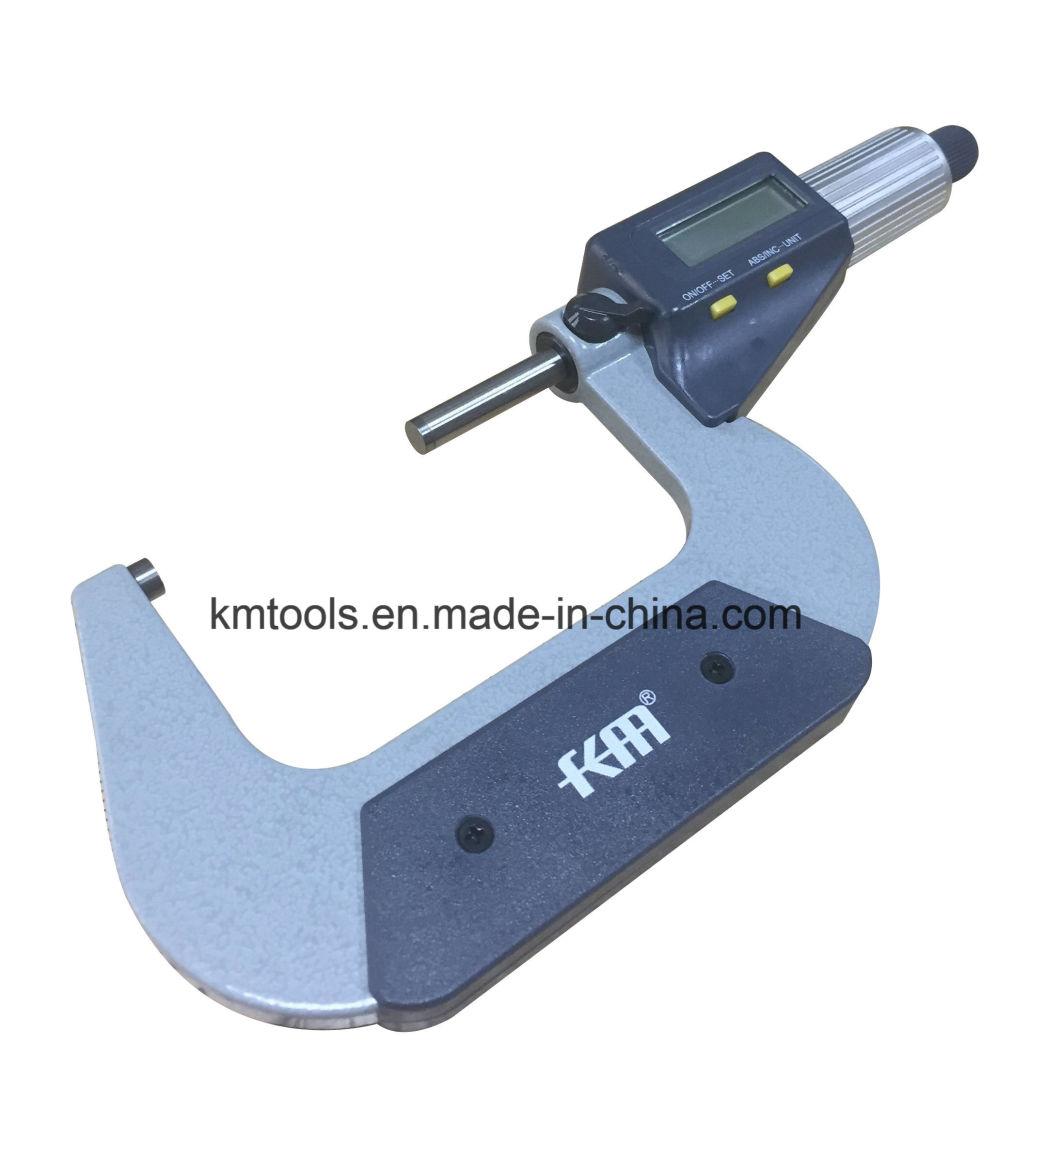 50-75mm Digital Outside Micrometer with 0.001mm Resolution Measuring Tool